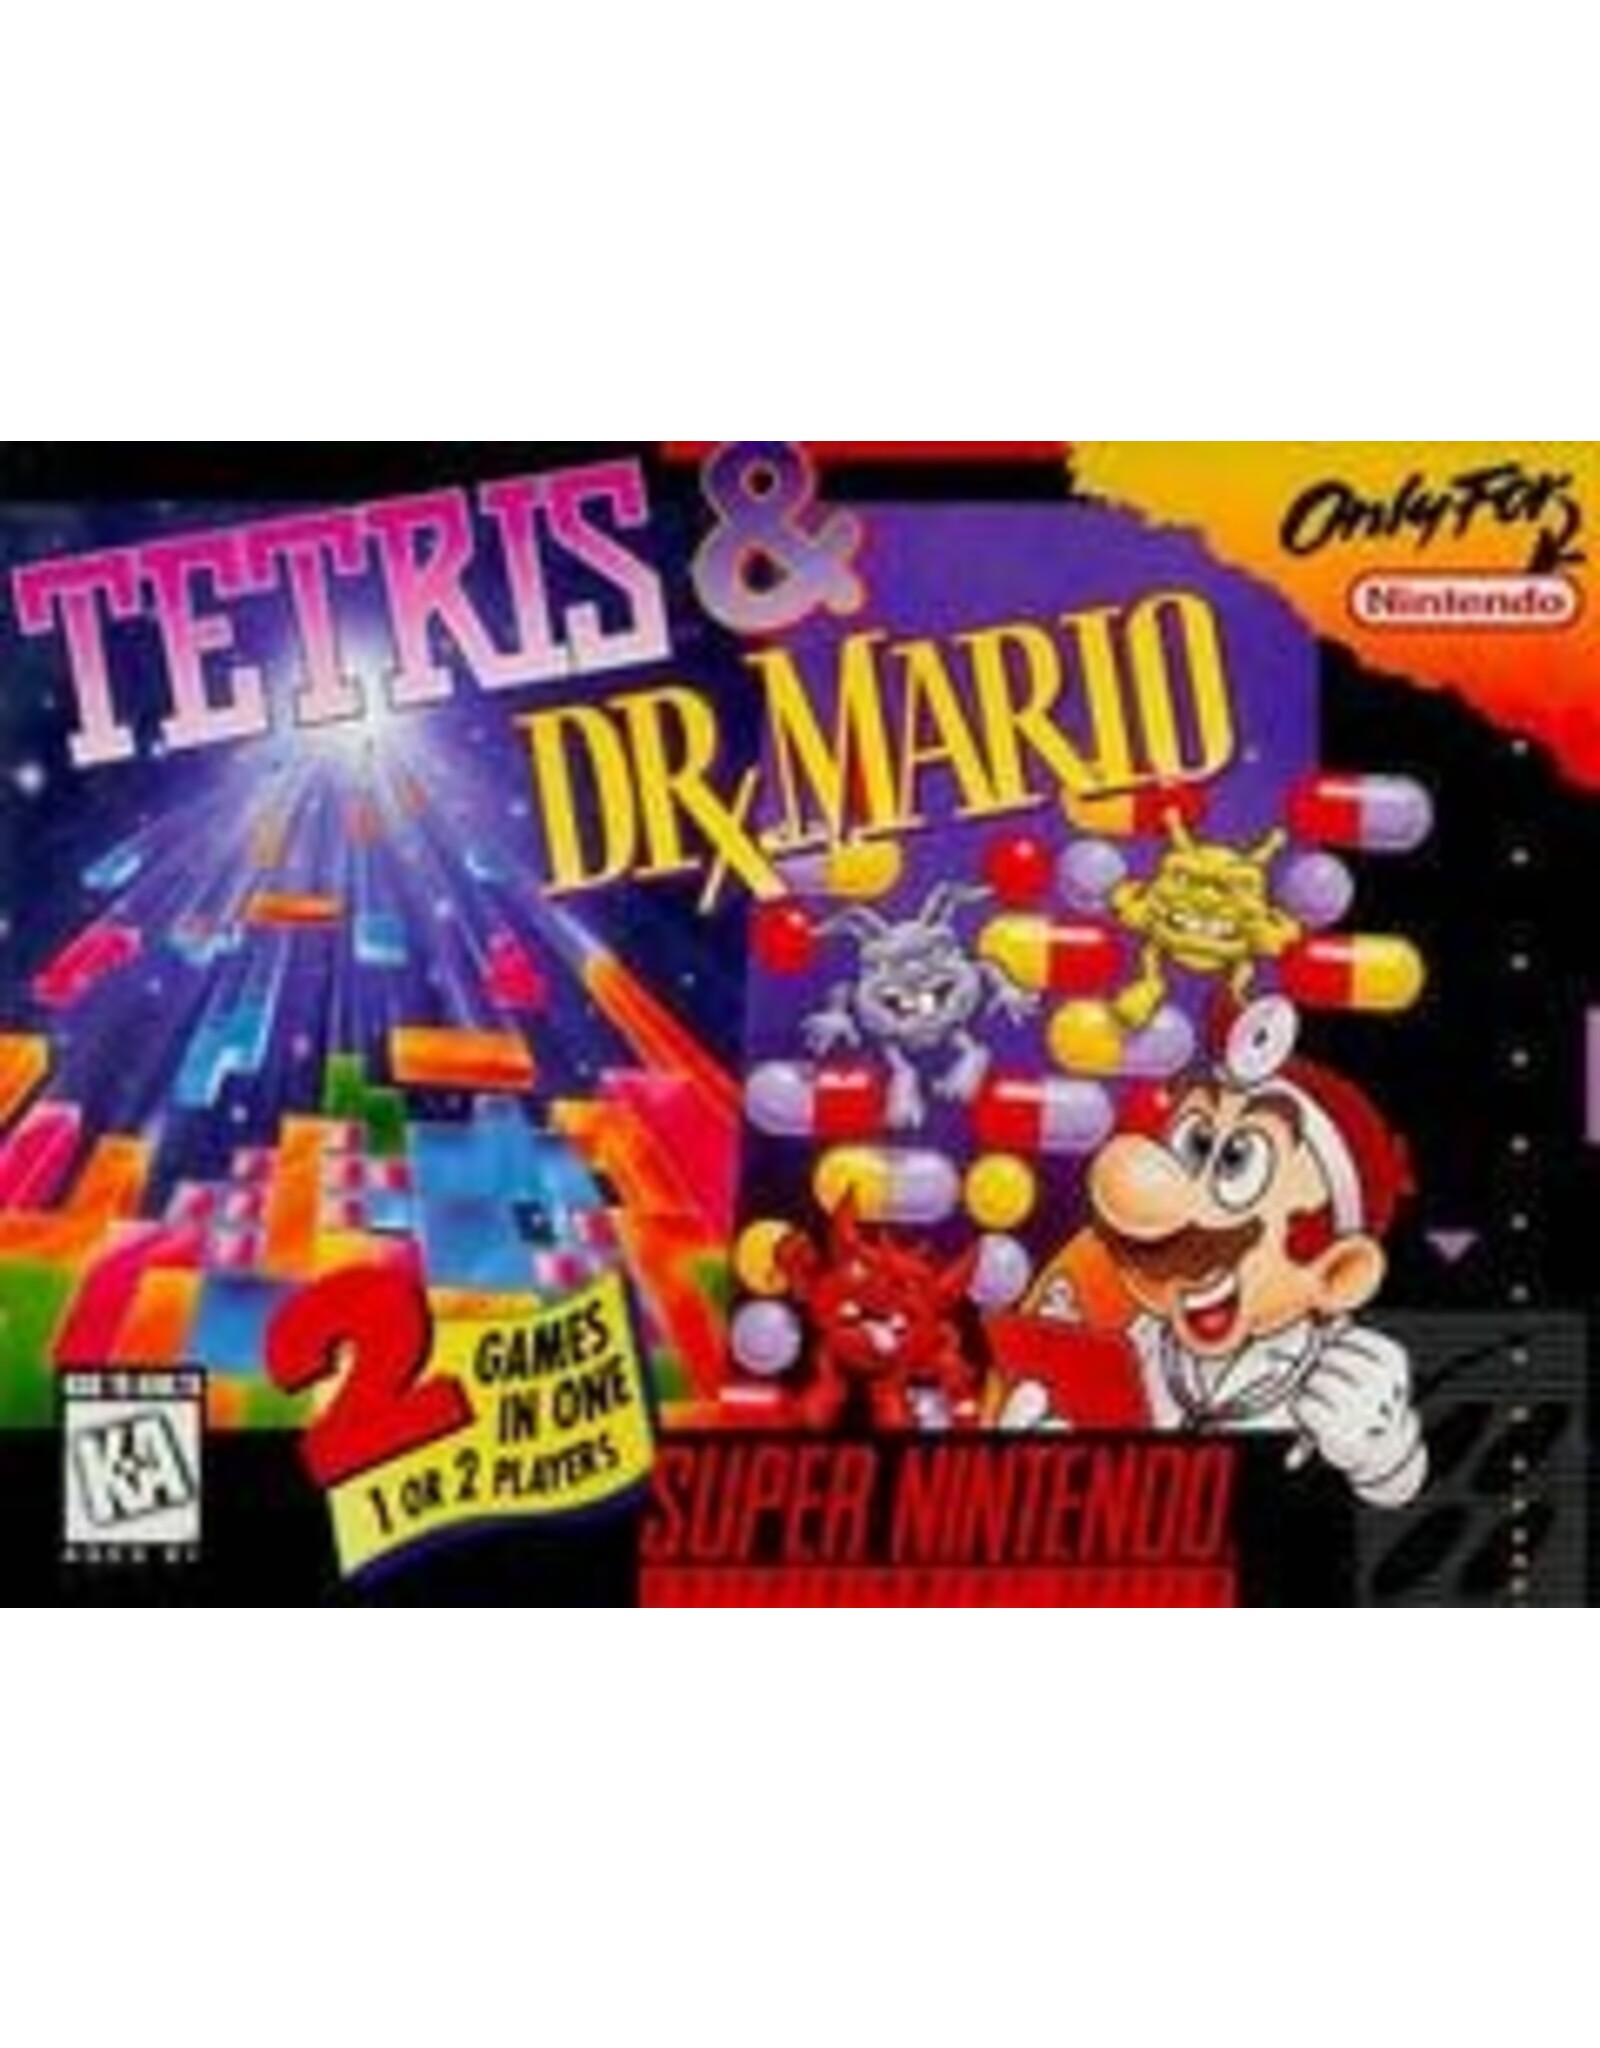 Super Nintendo Tetris and Dr. Mario (Cart Only, Cosmetic Damage)